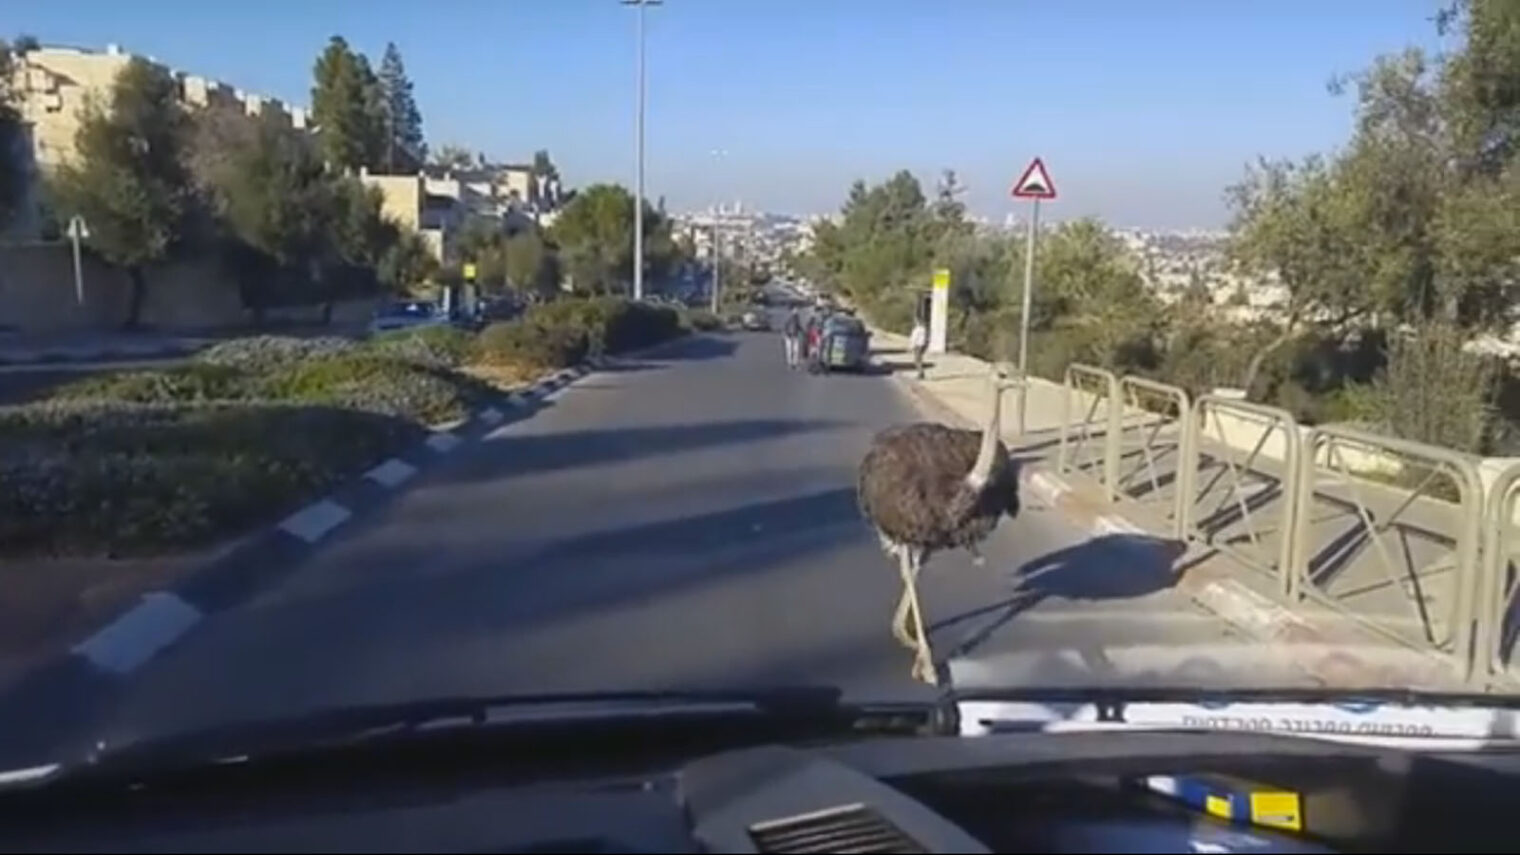 Is that really an ostrich? Screenshot from YouTube video posted December 27 by Israel National News.